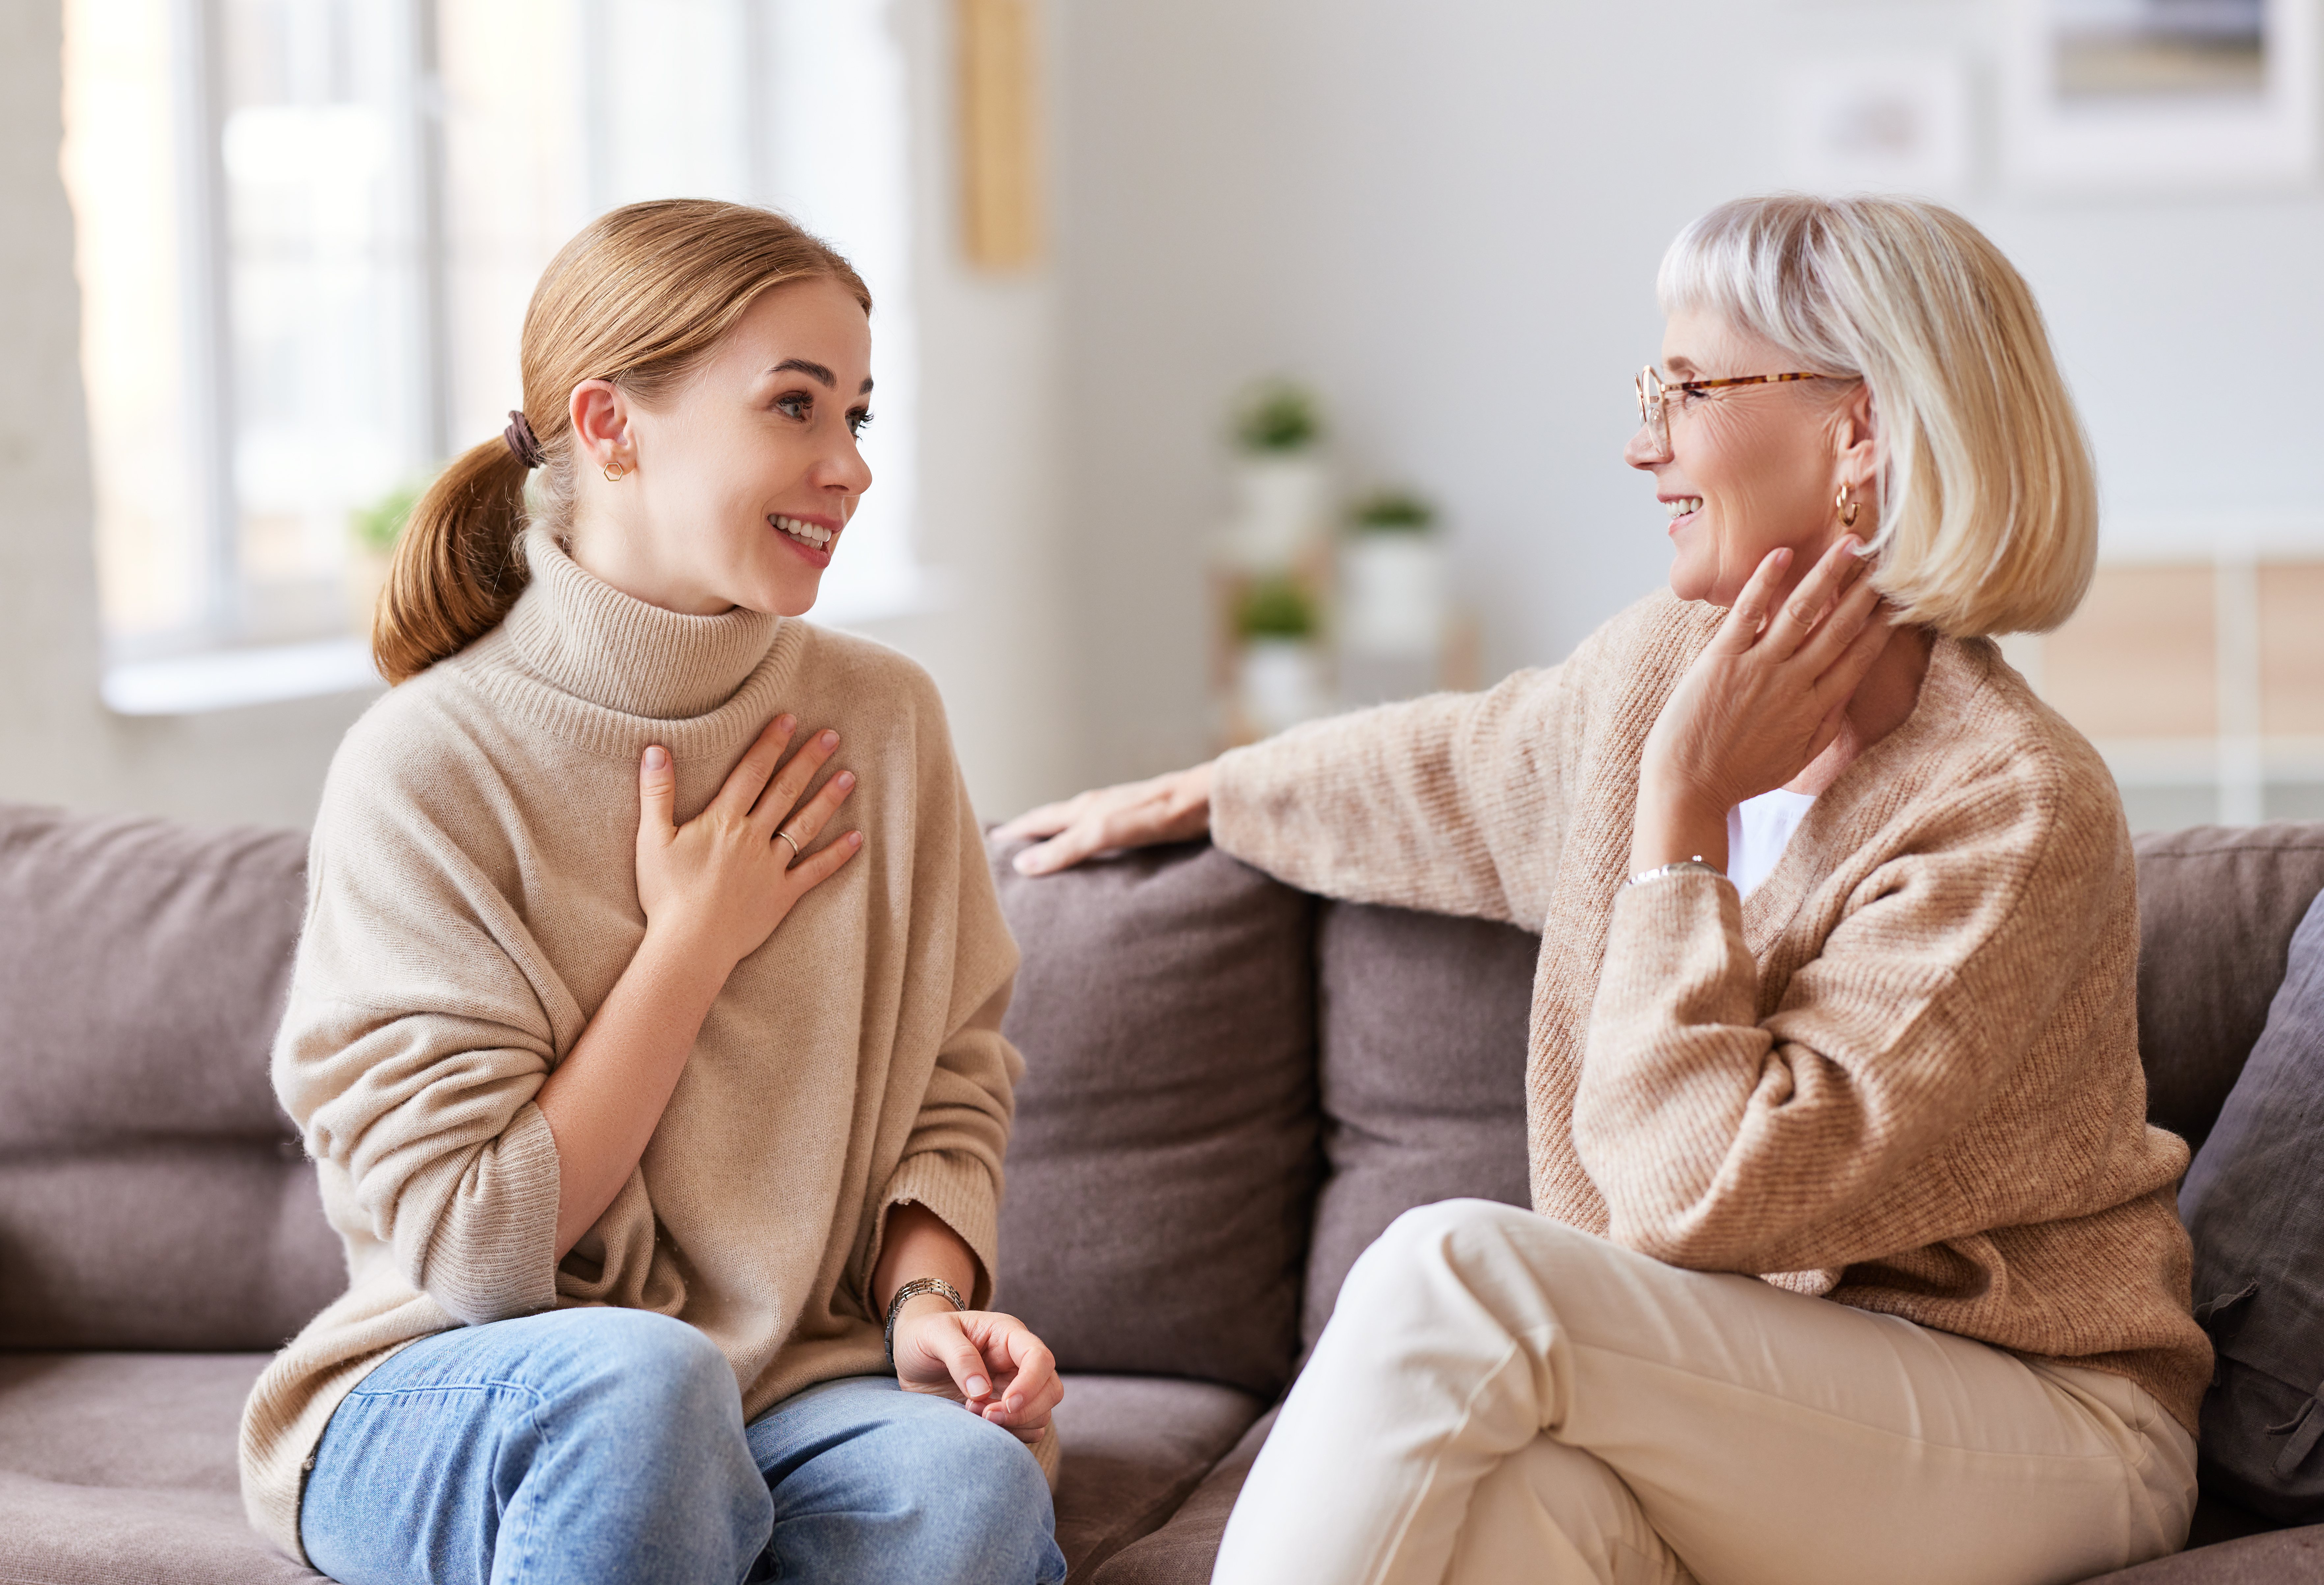 A young woman talking to an older woman | Source: Shutterstock